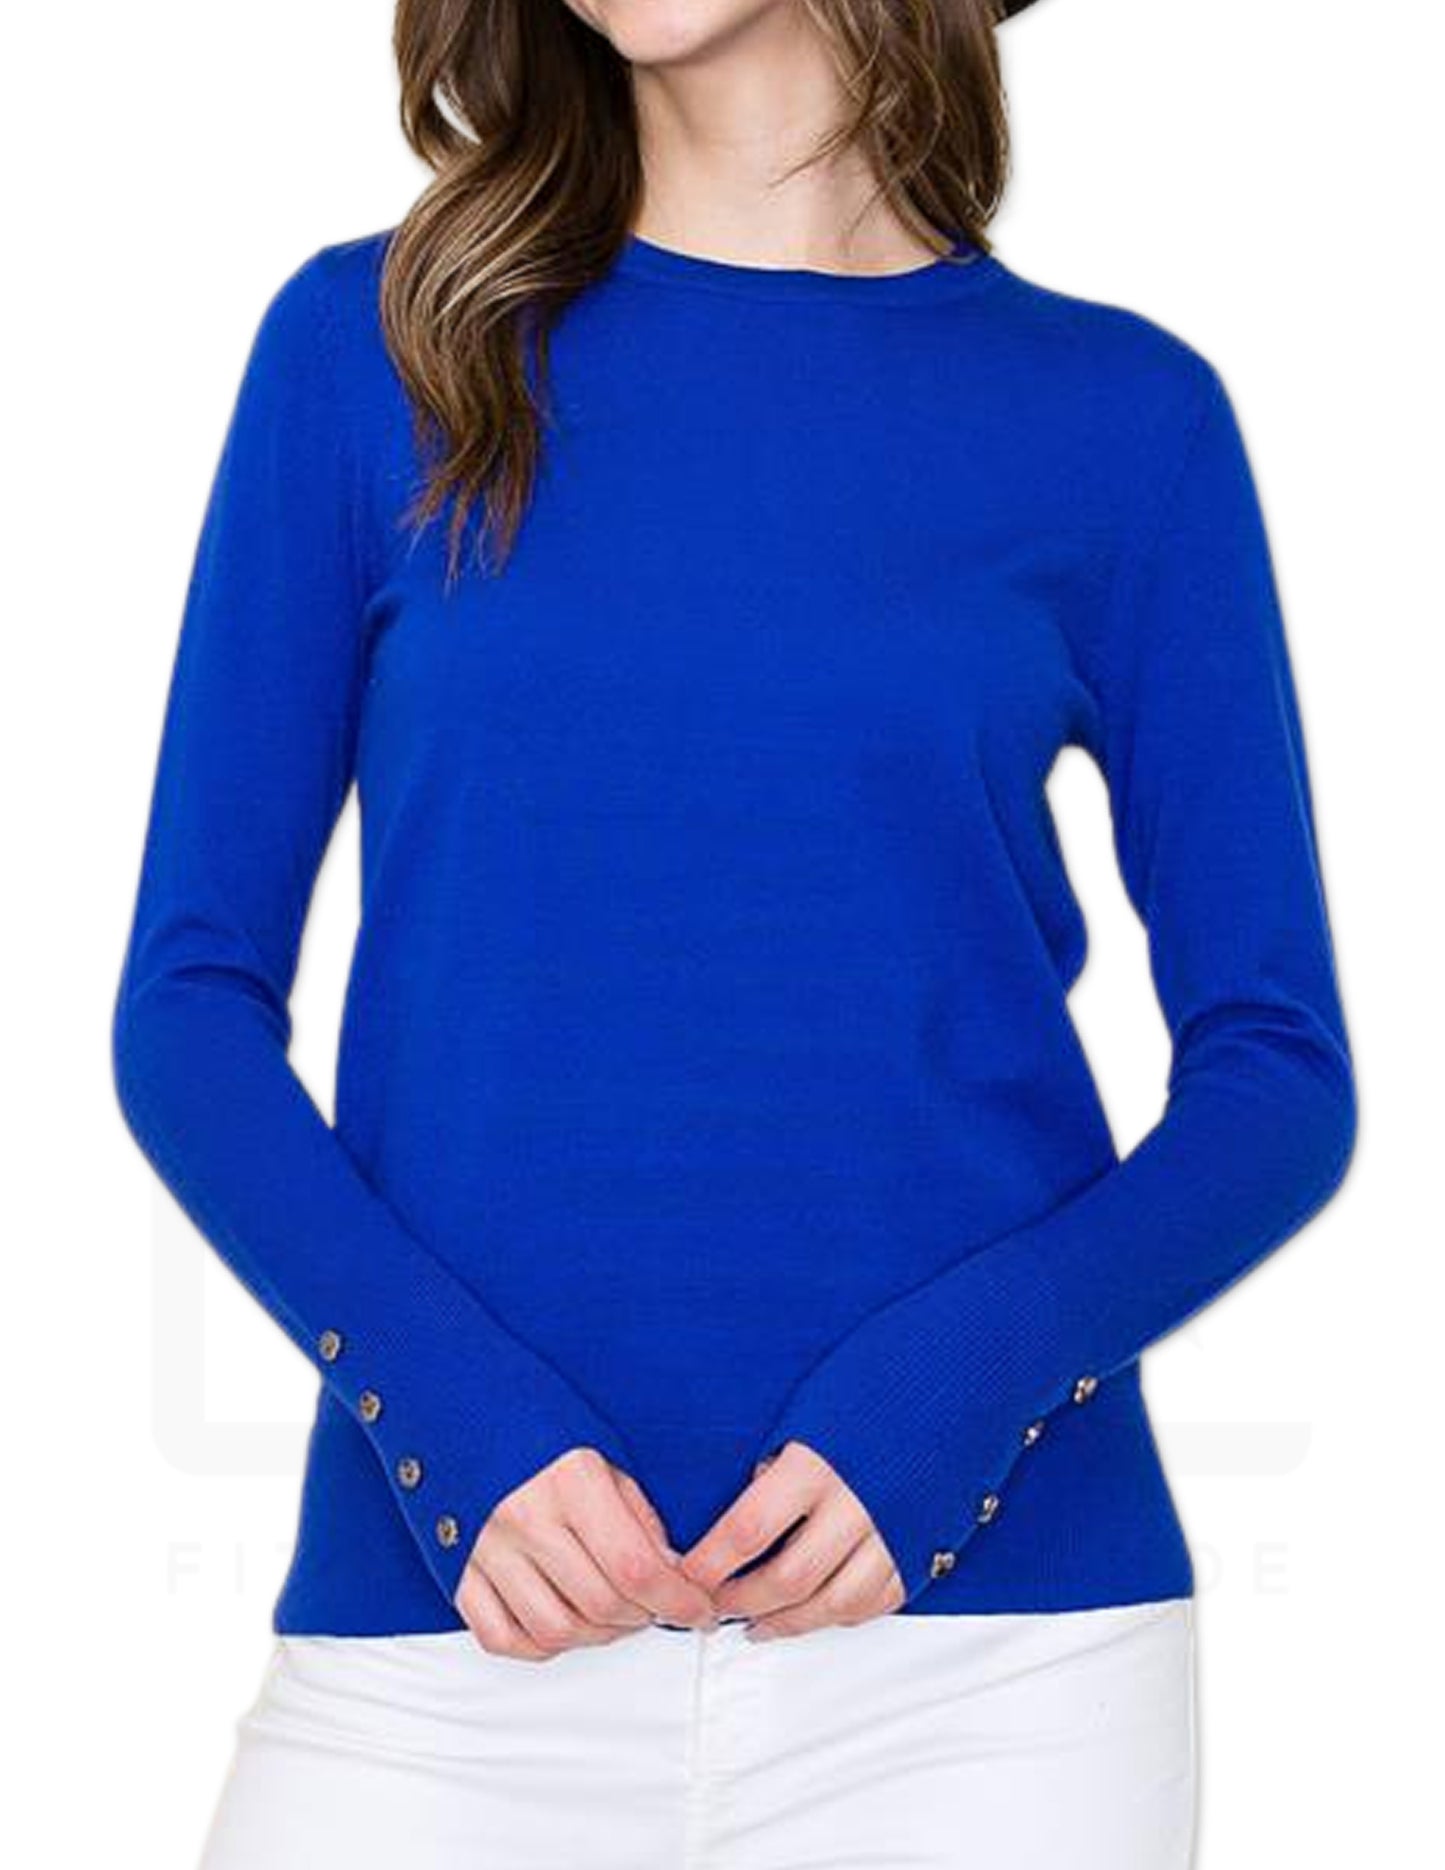 Button Detailed Cuff Pullover Sweater - Royal Blue